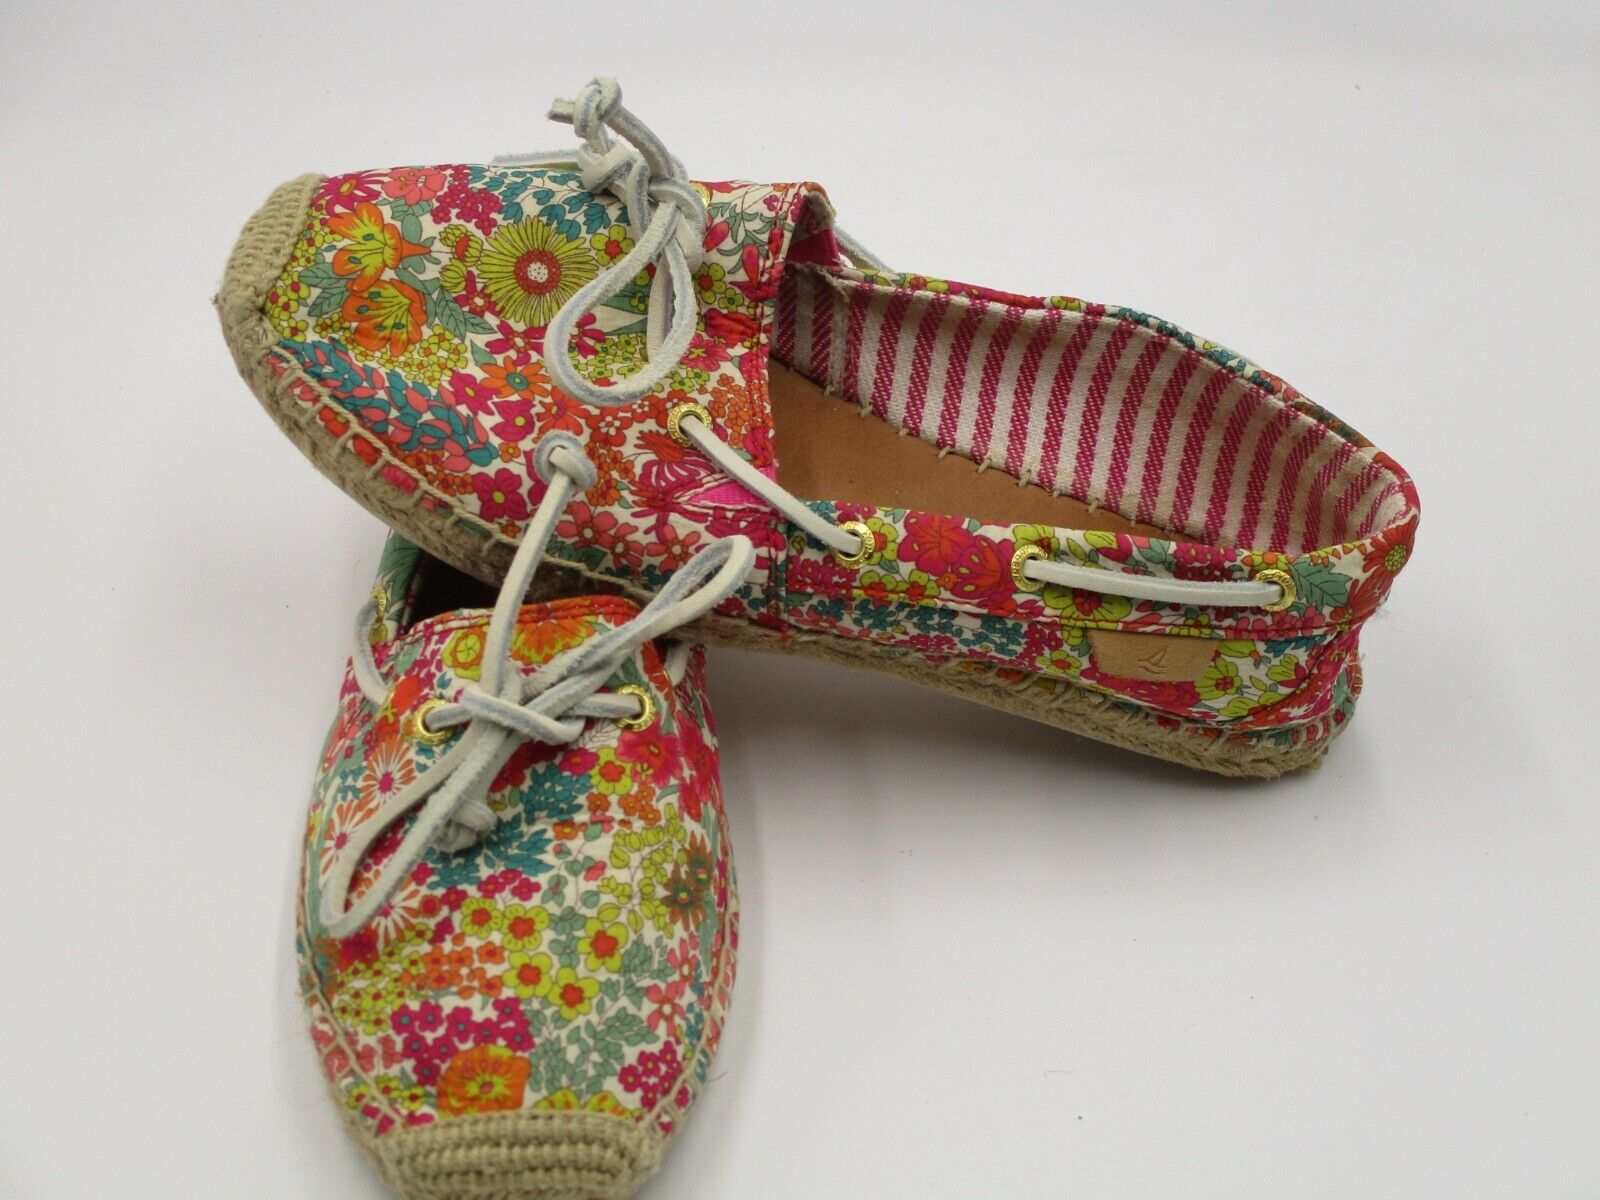 SPERRY Top Sider Espadrille Boat Shoes Size 7M Pink Multi Floral Canvas STS91860